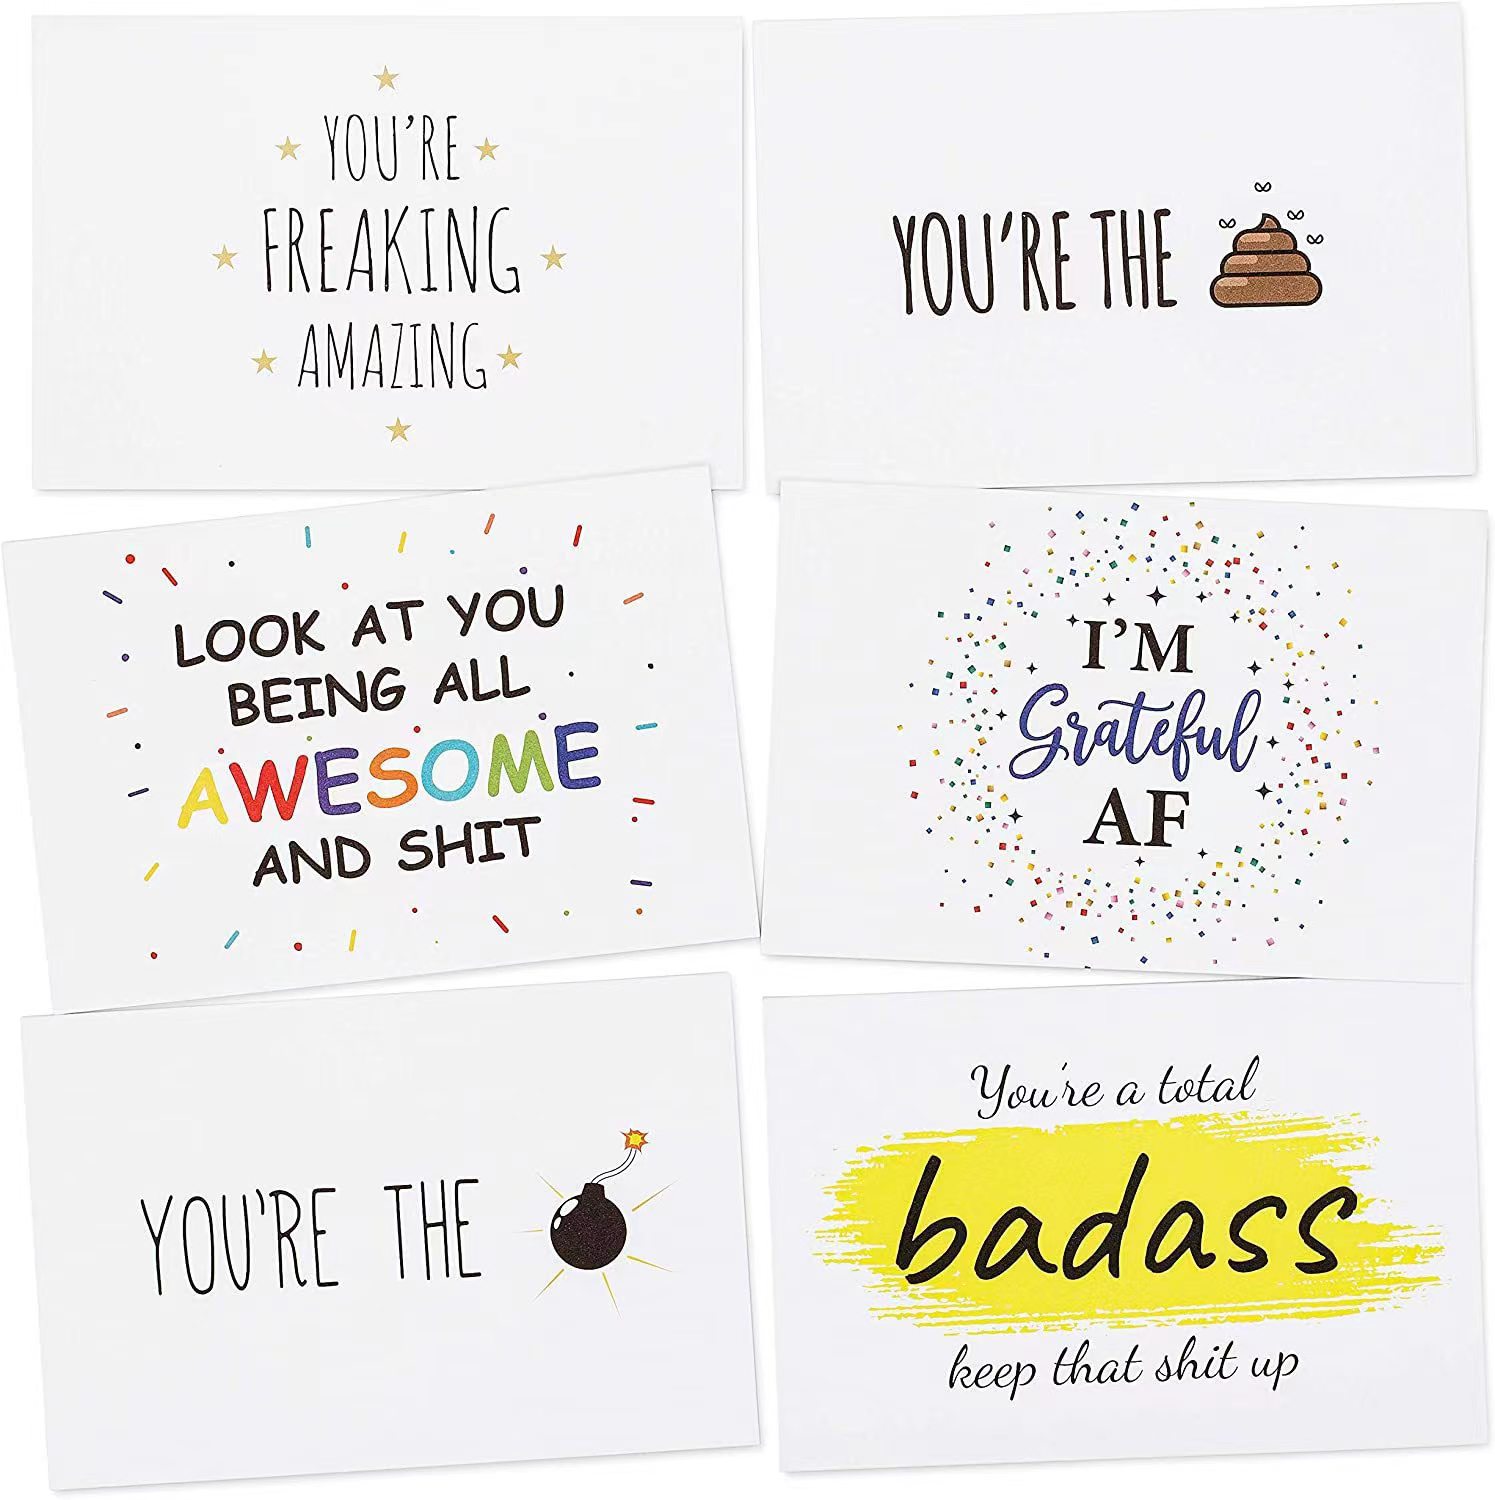 Funny Inspirational Cards in 6 Hilarious Designs